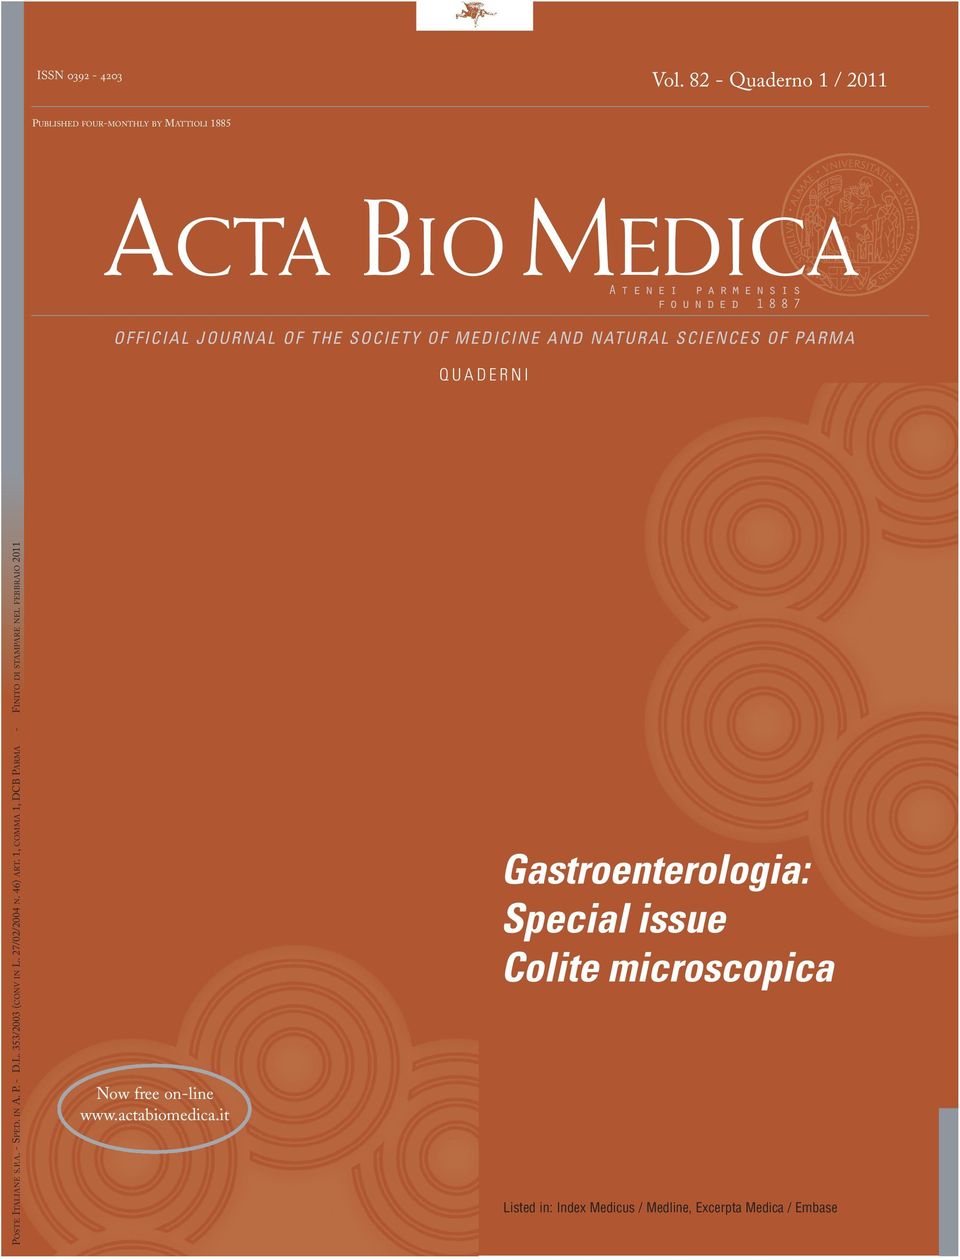 OFFICIAL JOURNAL OF THE SOCIETY OF MEDICINE AND NATURAL SCIENCES OF PARMA Q U A D E R N I POSTE ITALIANE S.P.A. - SPED. IN A. P. - D.L. 353/2003 (CONV IN L.